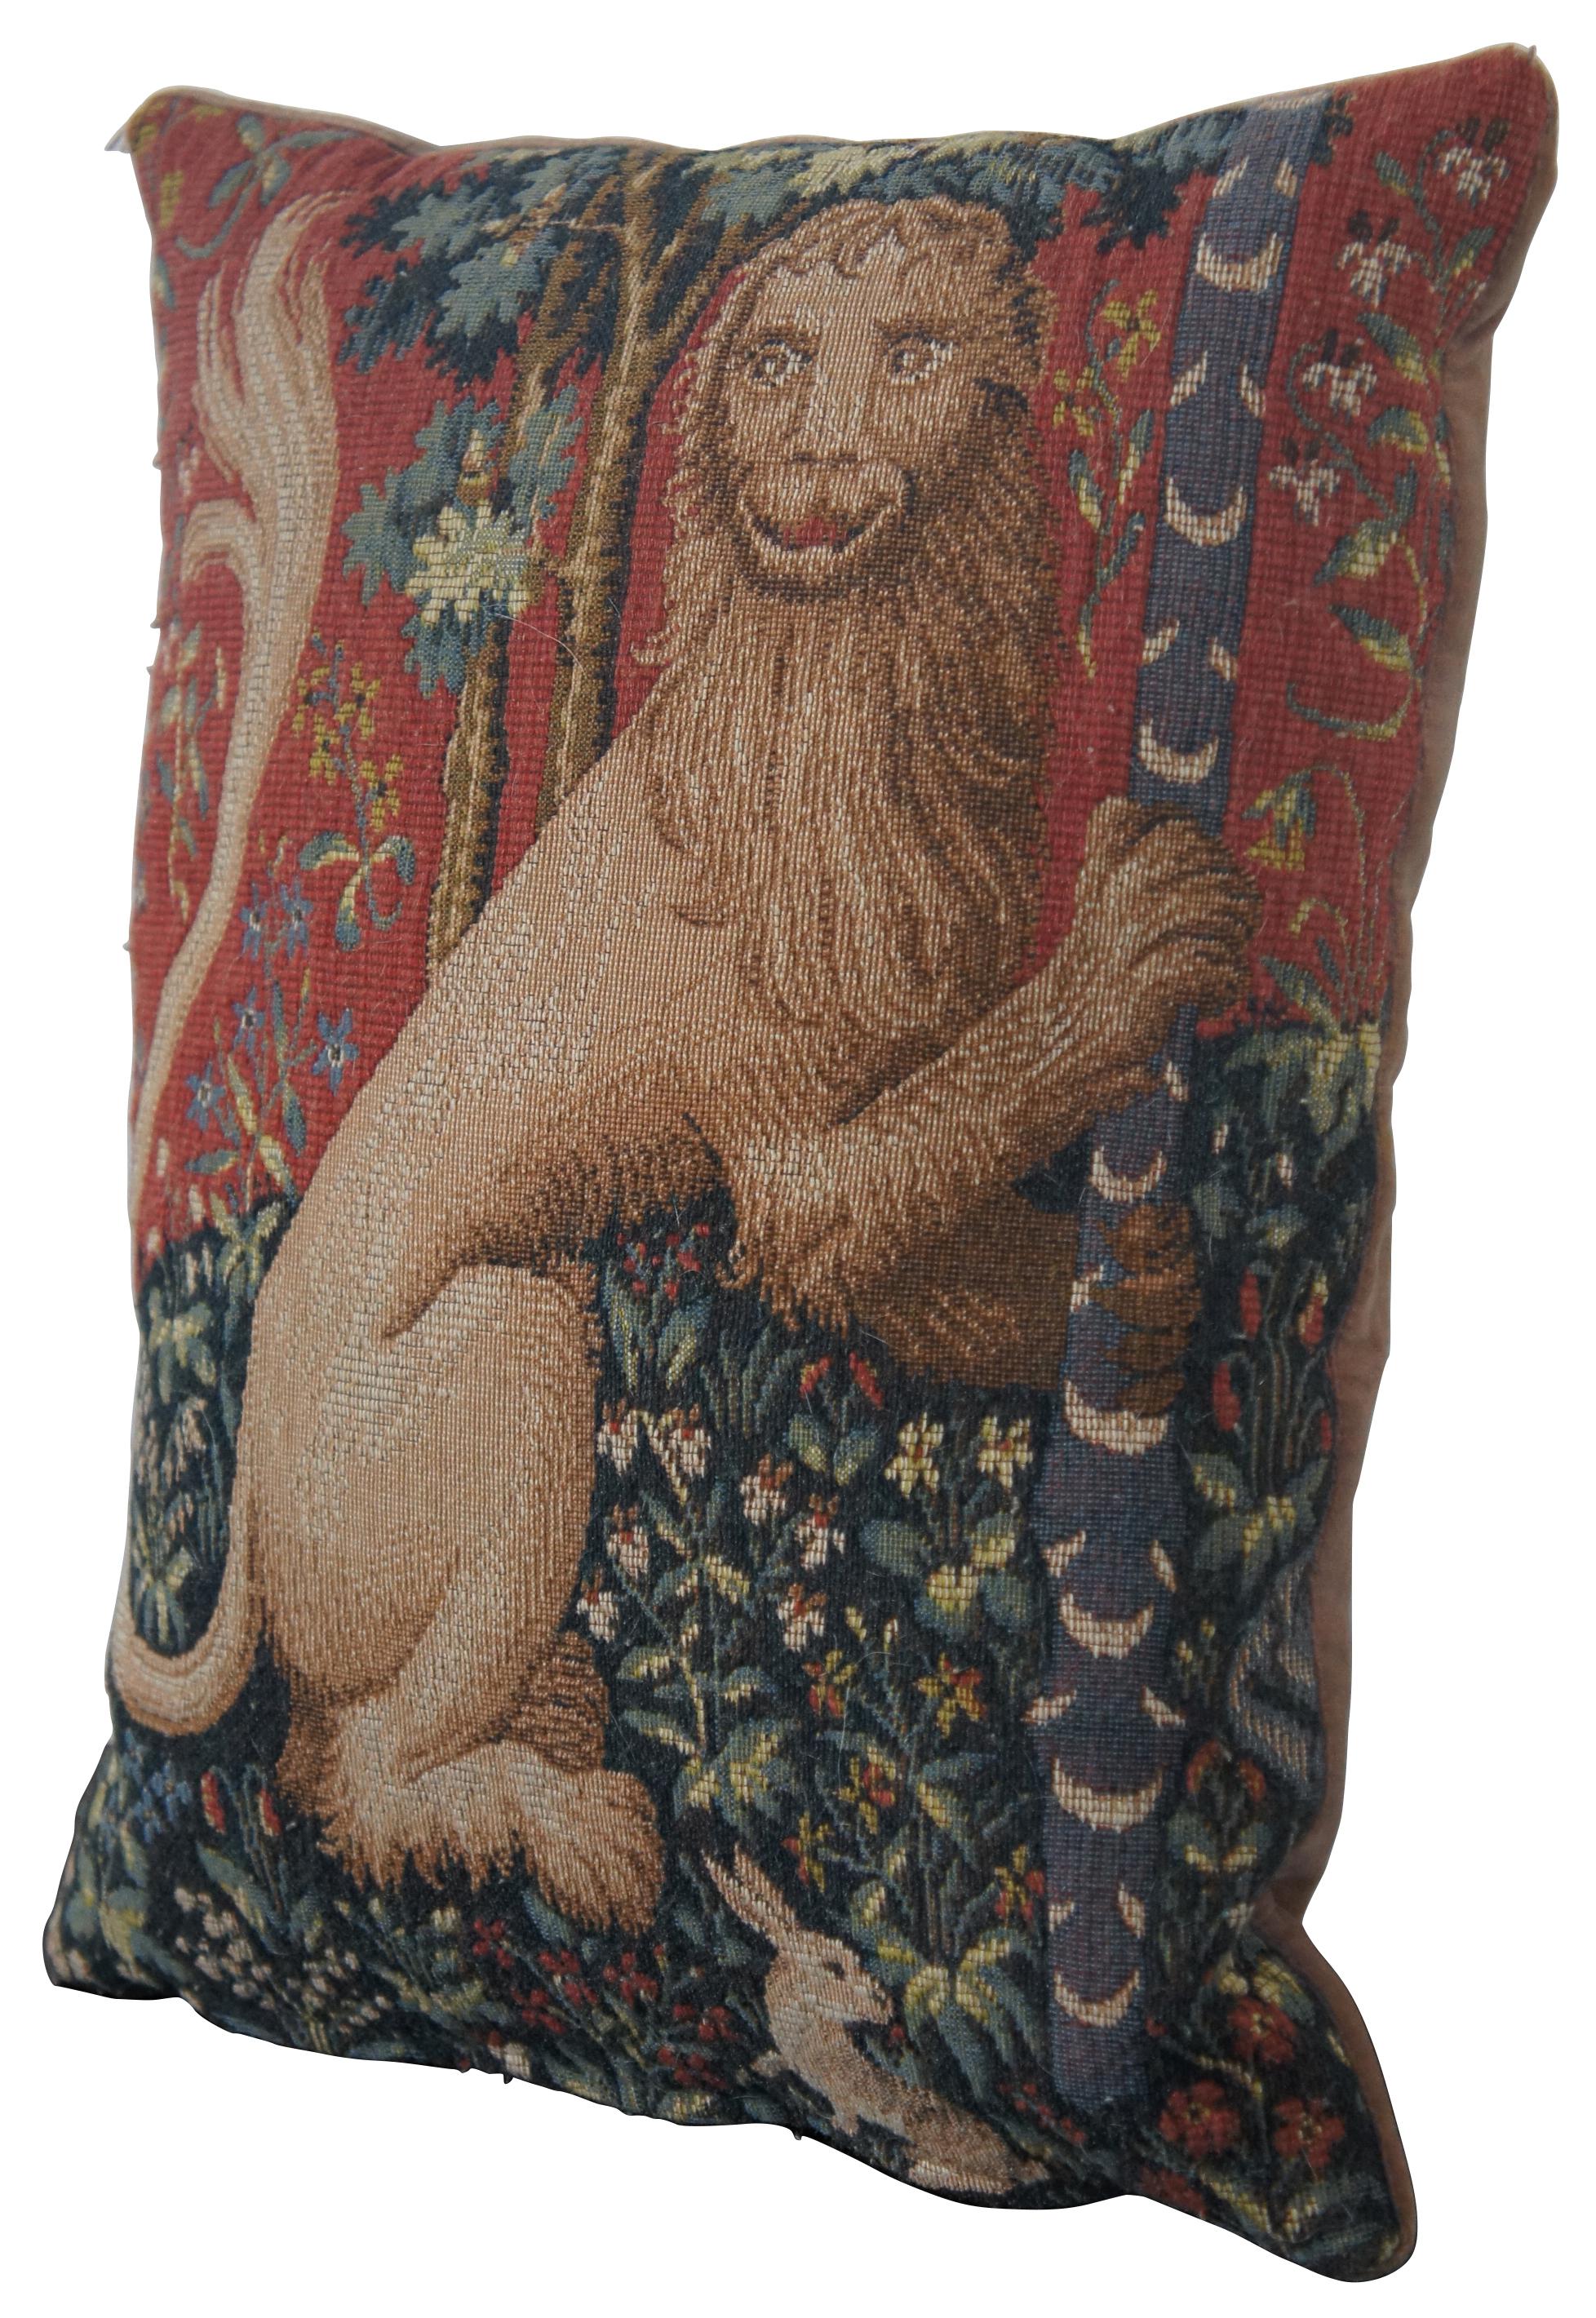 Medieval style, down filled, embroidered throw pillow with velour back featuring a heraldic lion and rabbits among trees and flowers, made in France for CJC of St Simons Island, GA.
 